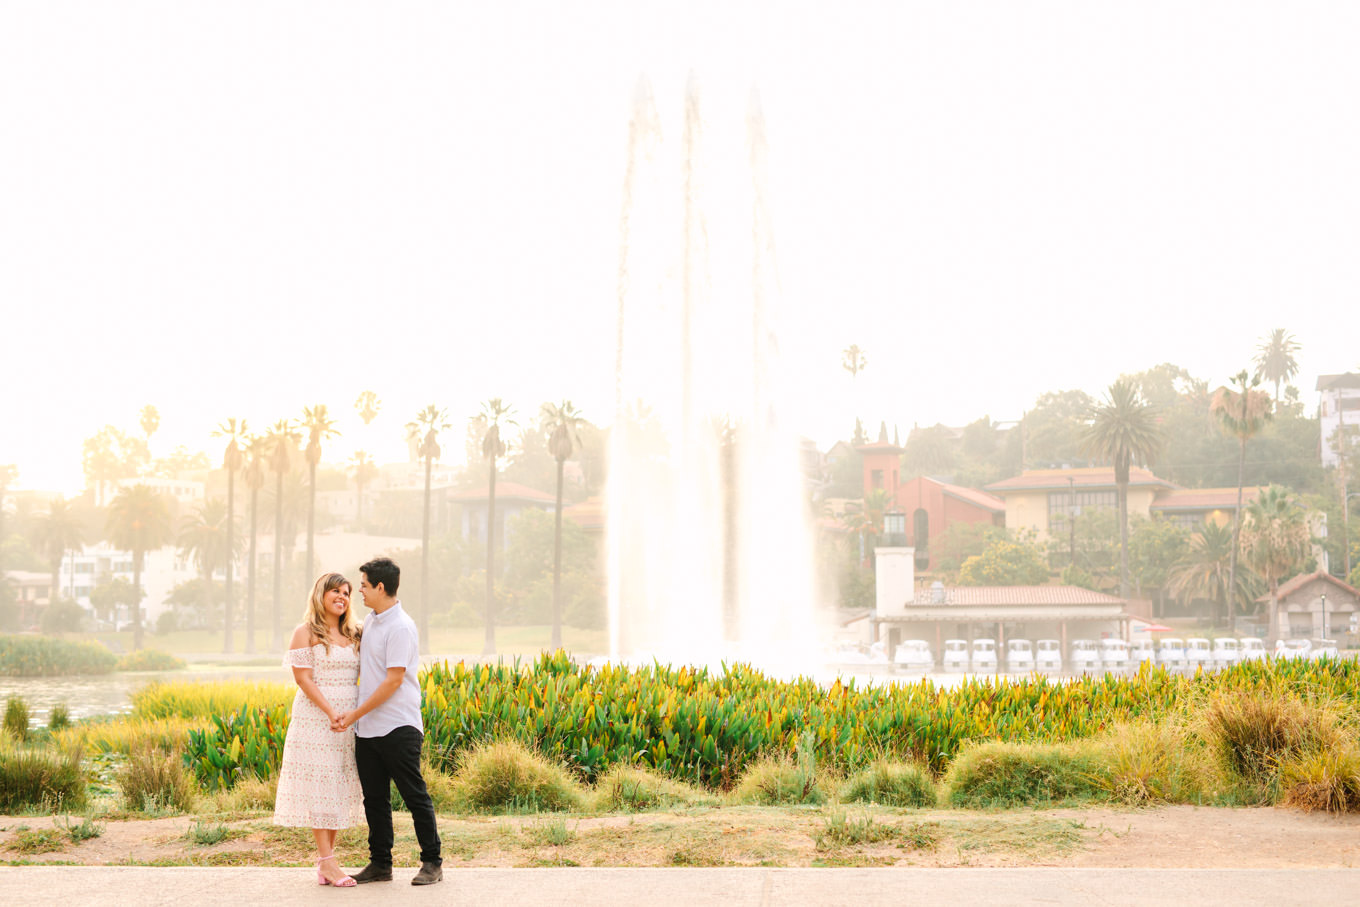 Echo Park Lake engagement session at sunrise | Engagement, elopement, and wedding photography roundup of Mary Costa’s favorite images from 2020 | Colorful and elevated photography for fun-loving couples in Southern California | #2020wedding #elopement #weddingphoto #weddingphotography #microwedding   Source: Mary Costa Photography | Los Angeles